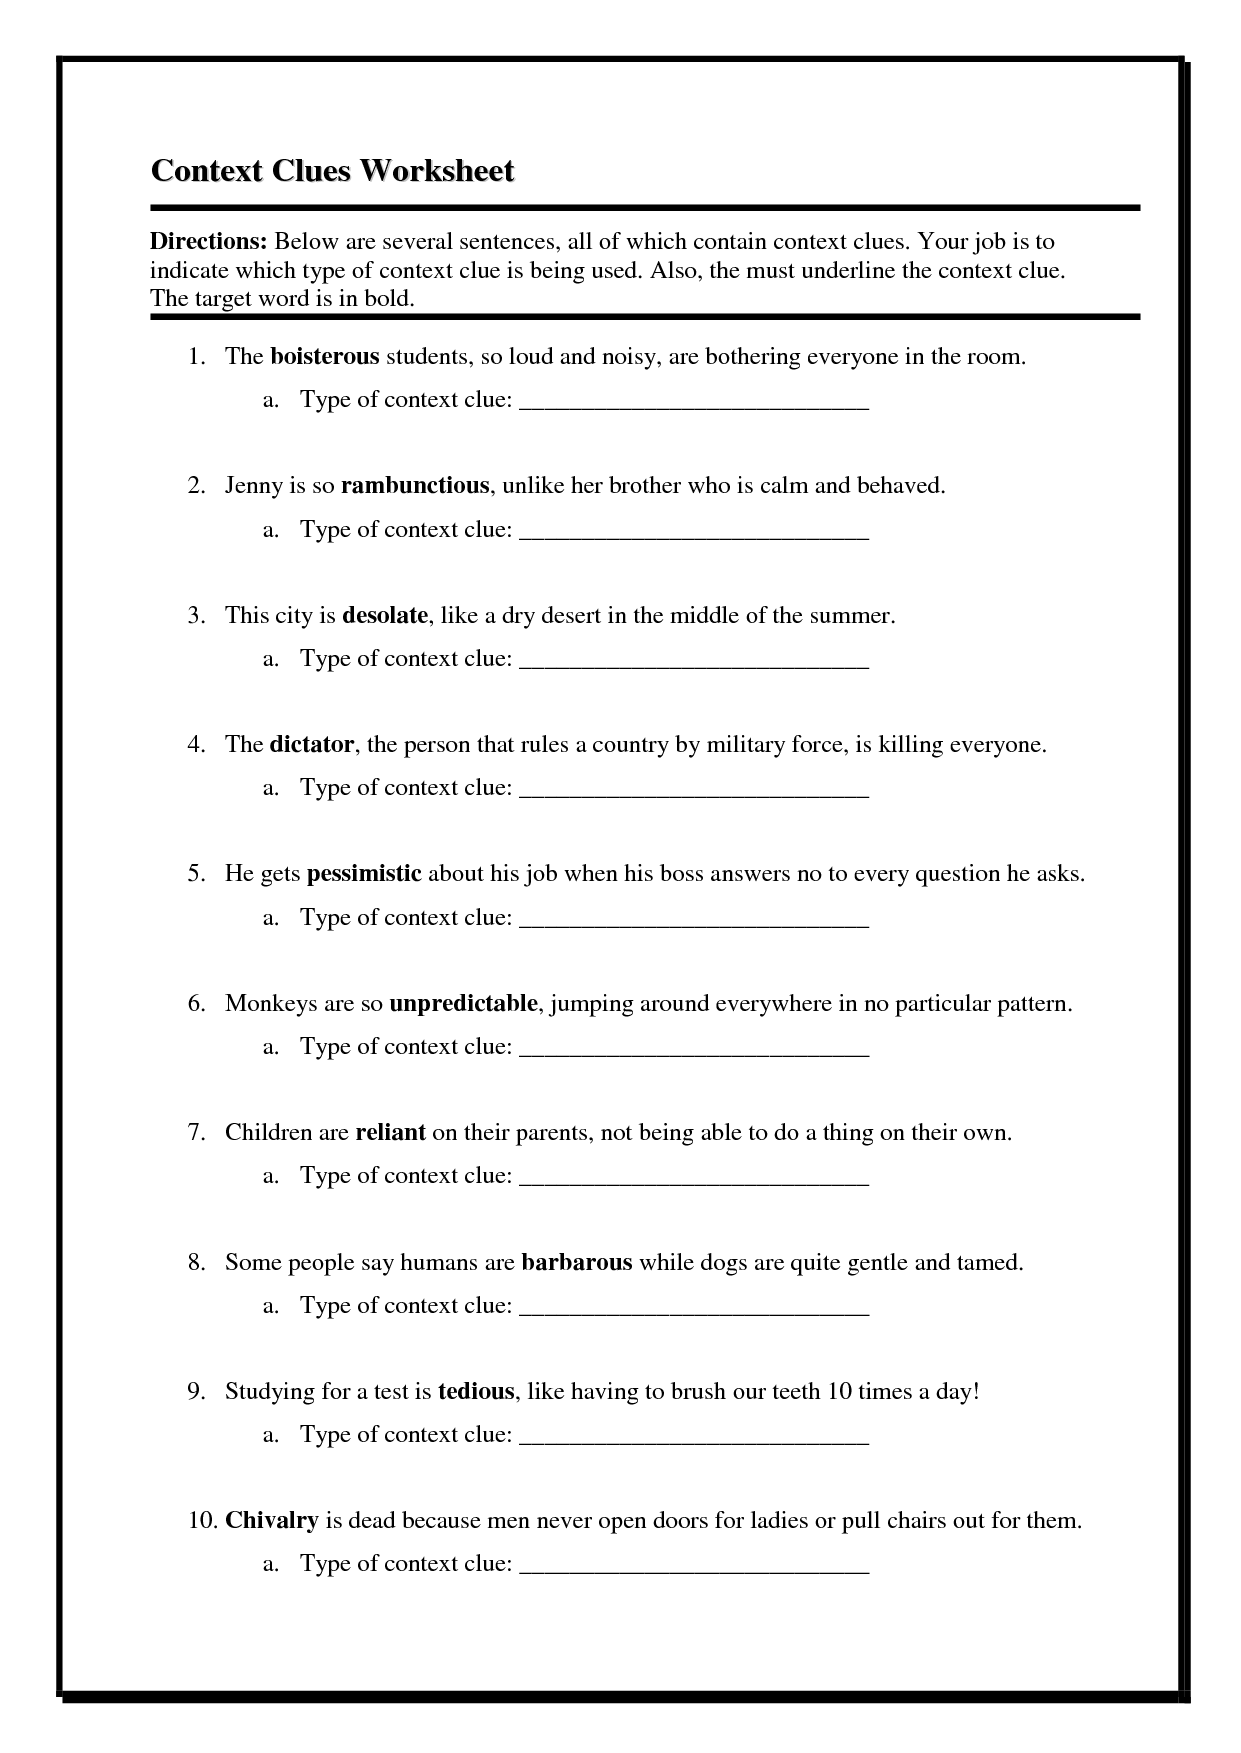 4th-grade-reading-comprehension-worksheets-best-coloring-pages-for-kids